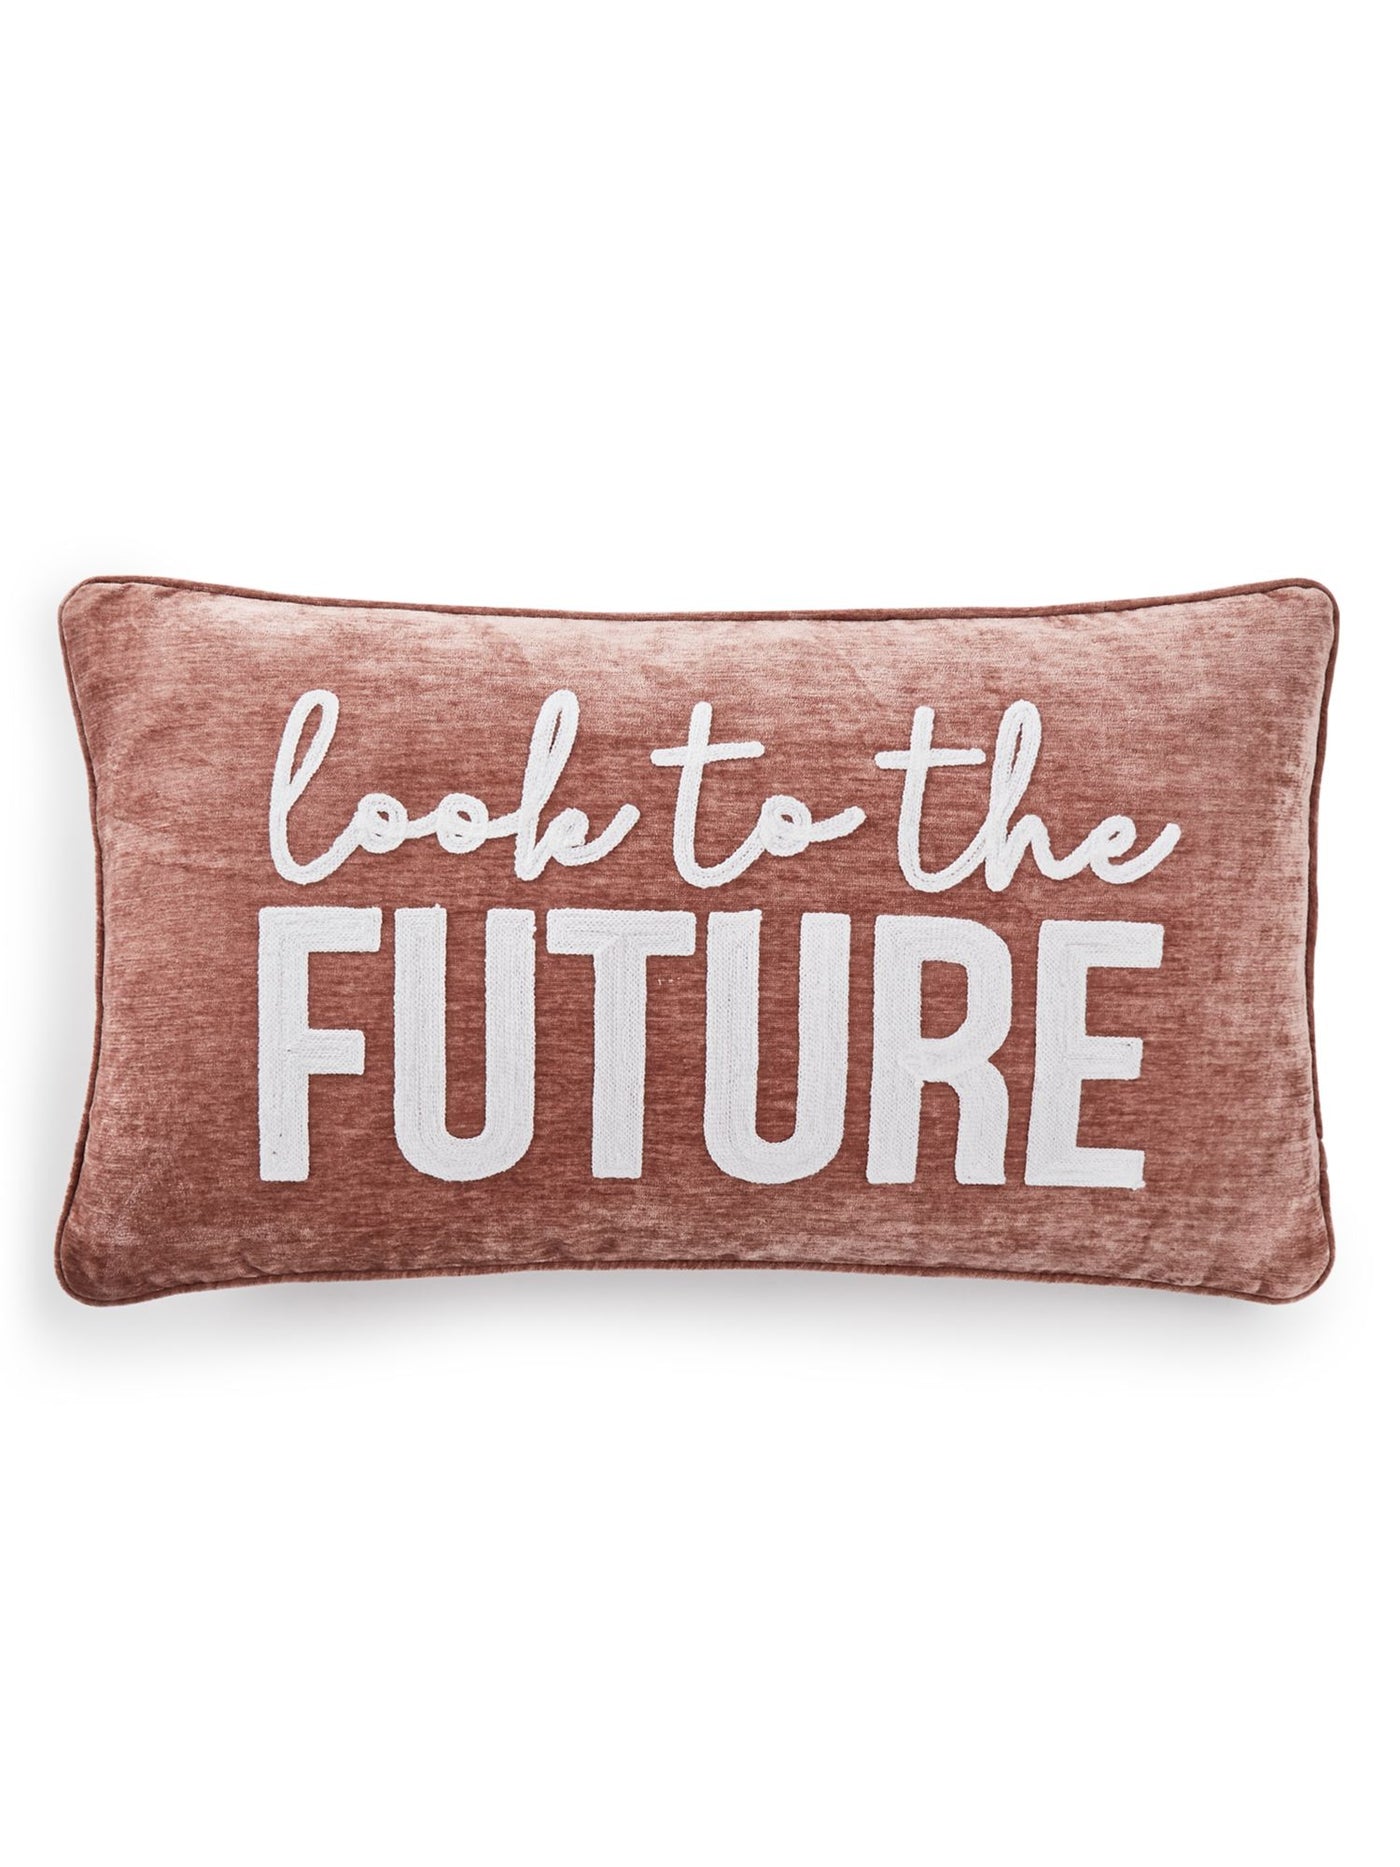 LACOURTE Pink Printed 14 x 24 in Decorative Pillow